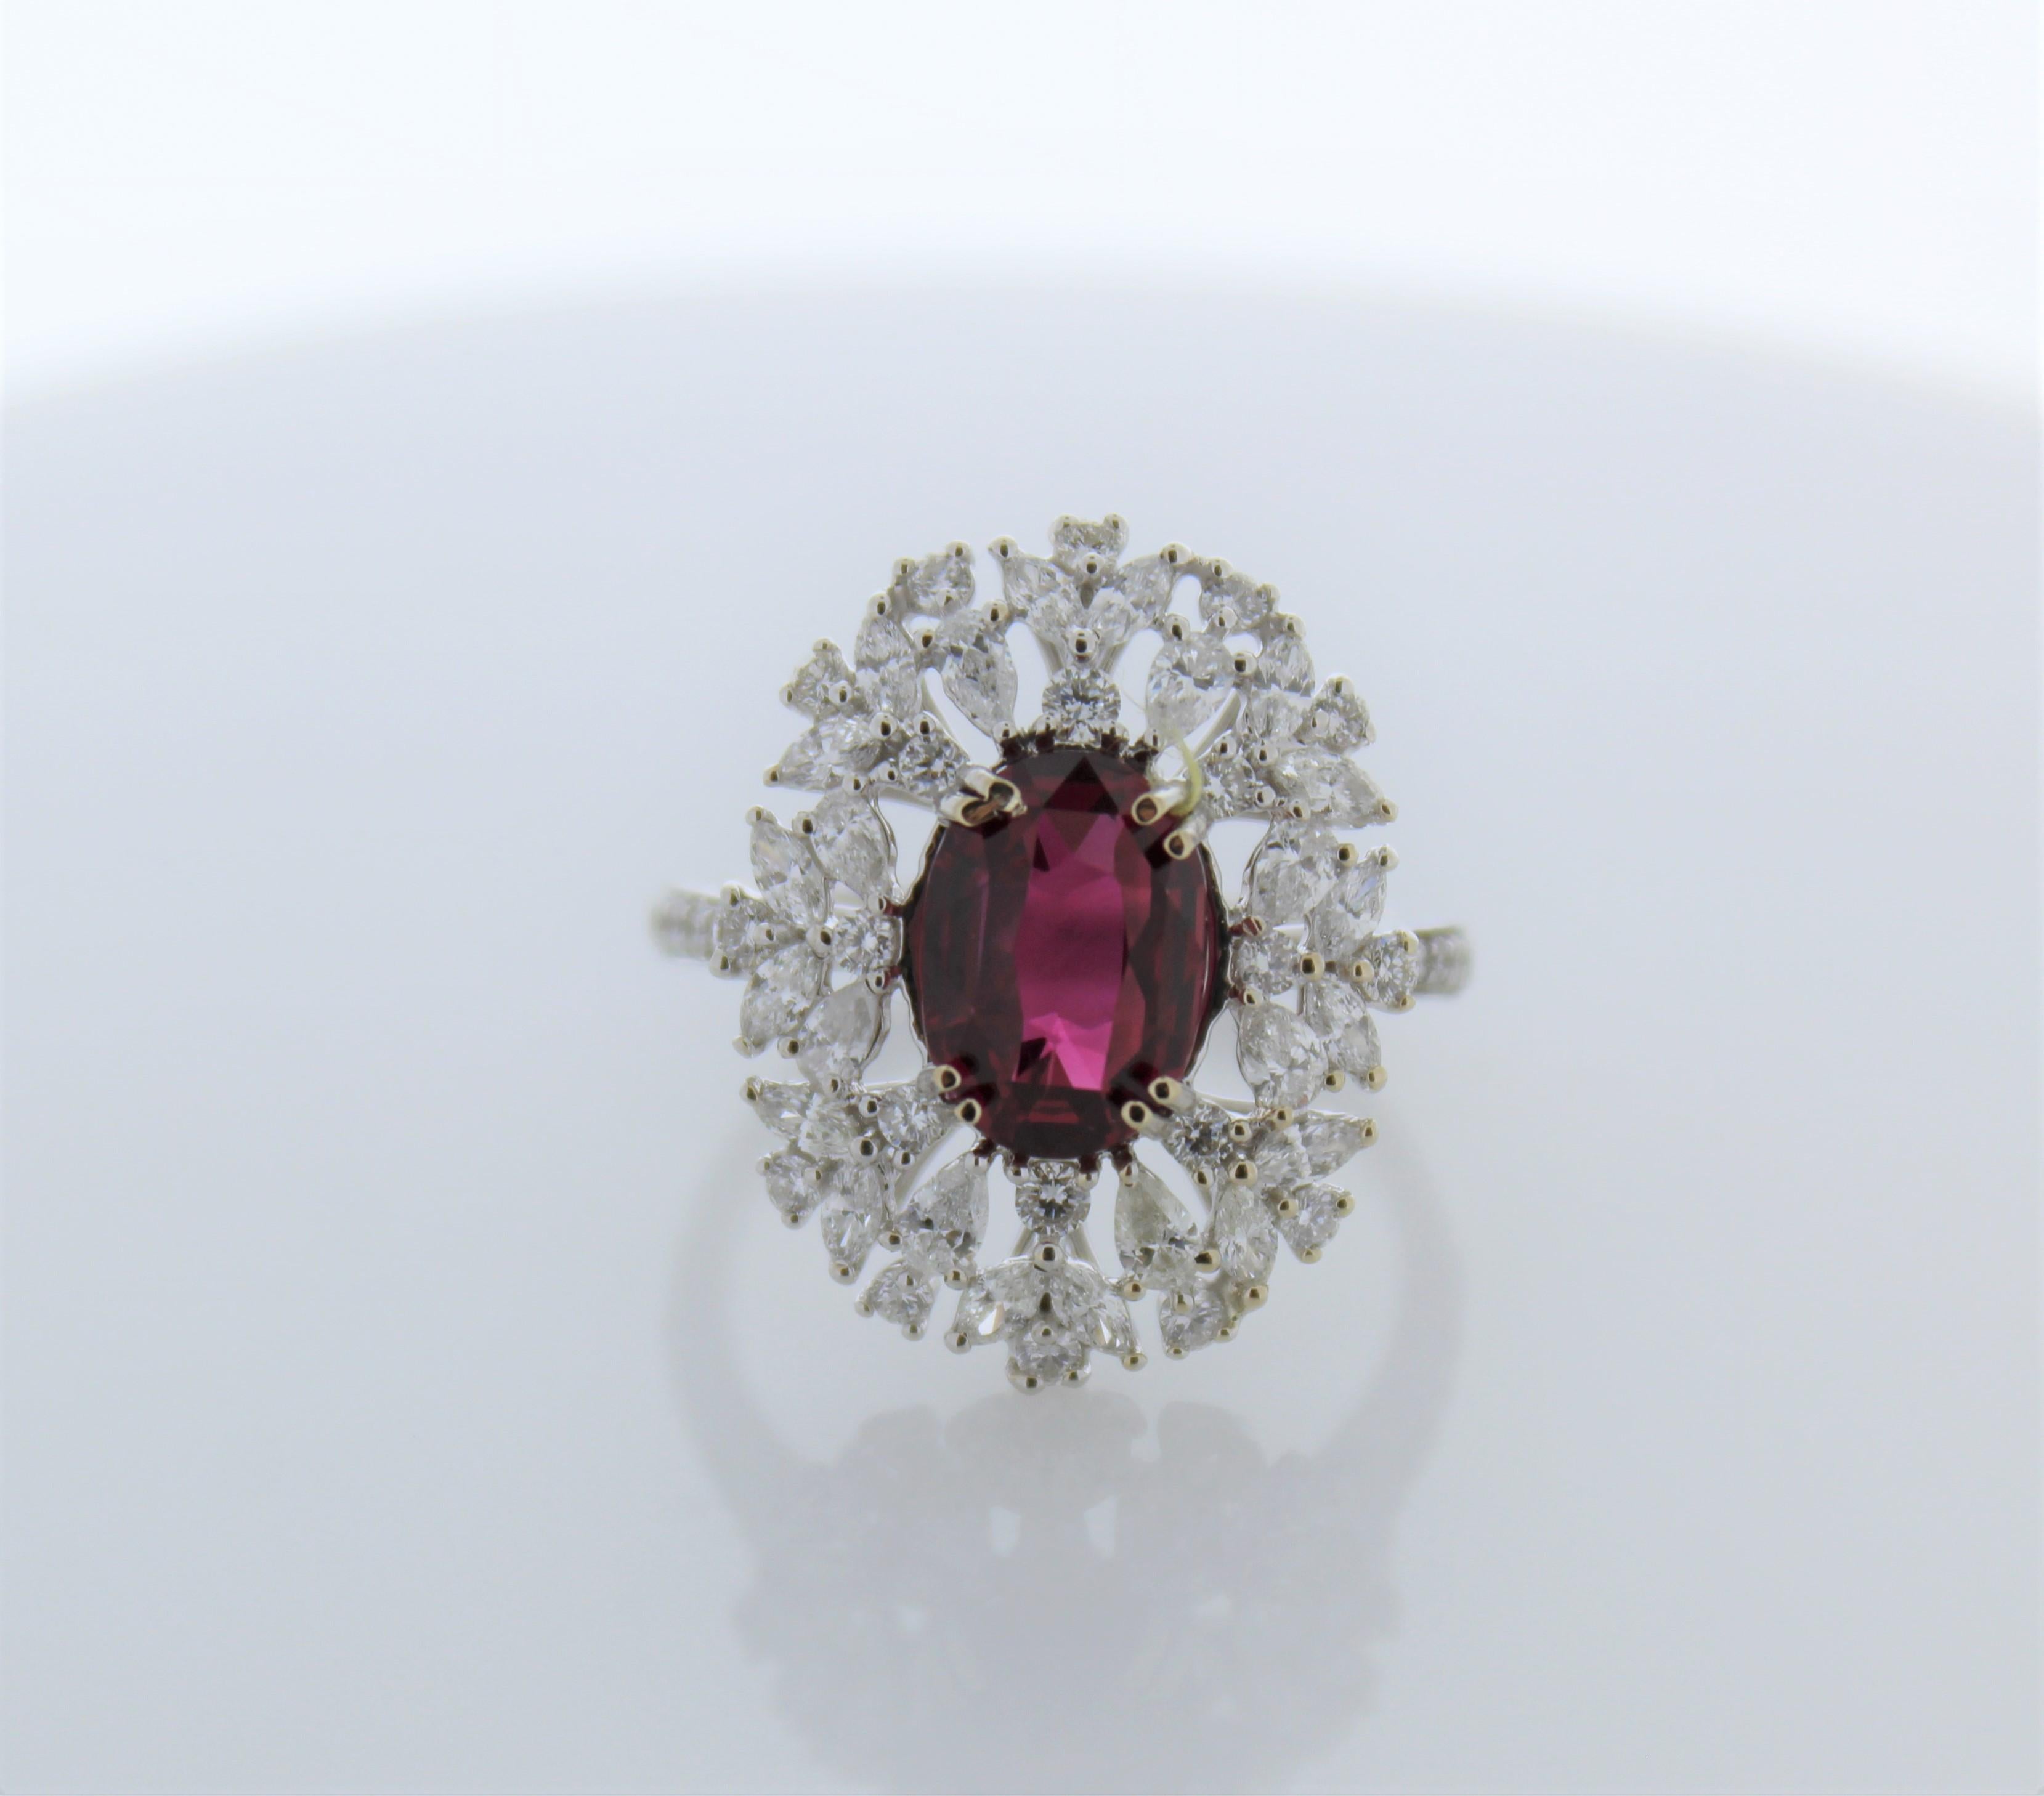 This original piece consists a ruby that weighs 3.04carats and small mixed cut 50 diamonds that total up to 1.22carats.